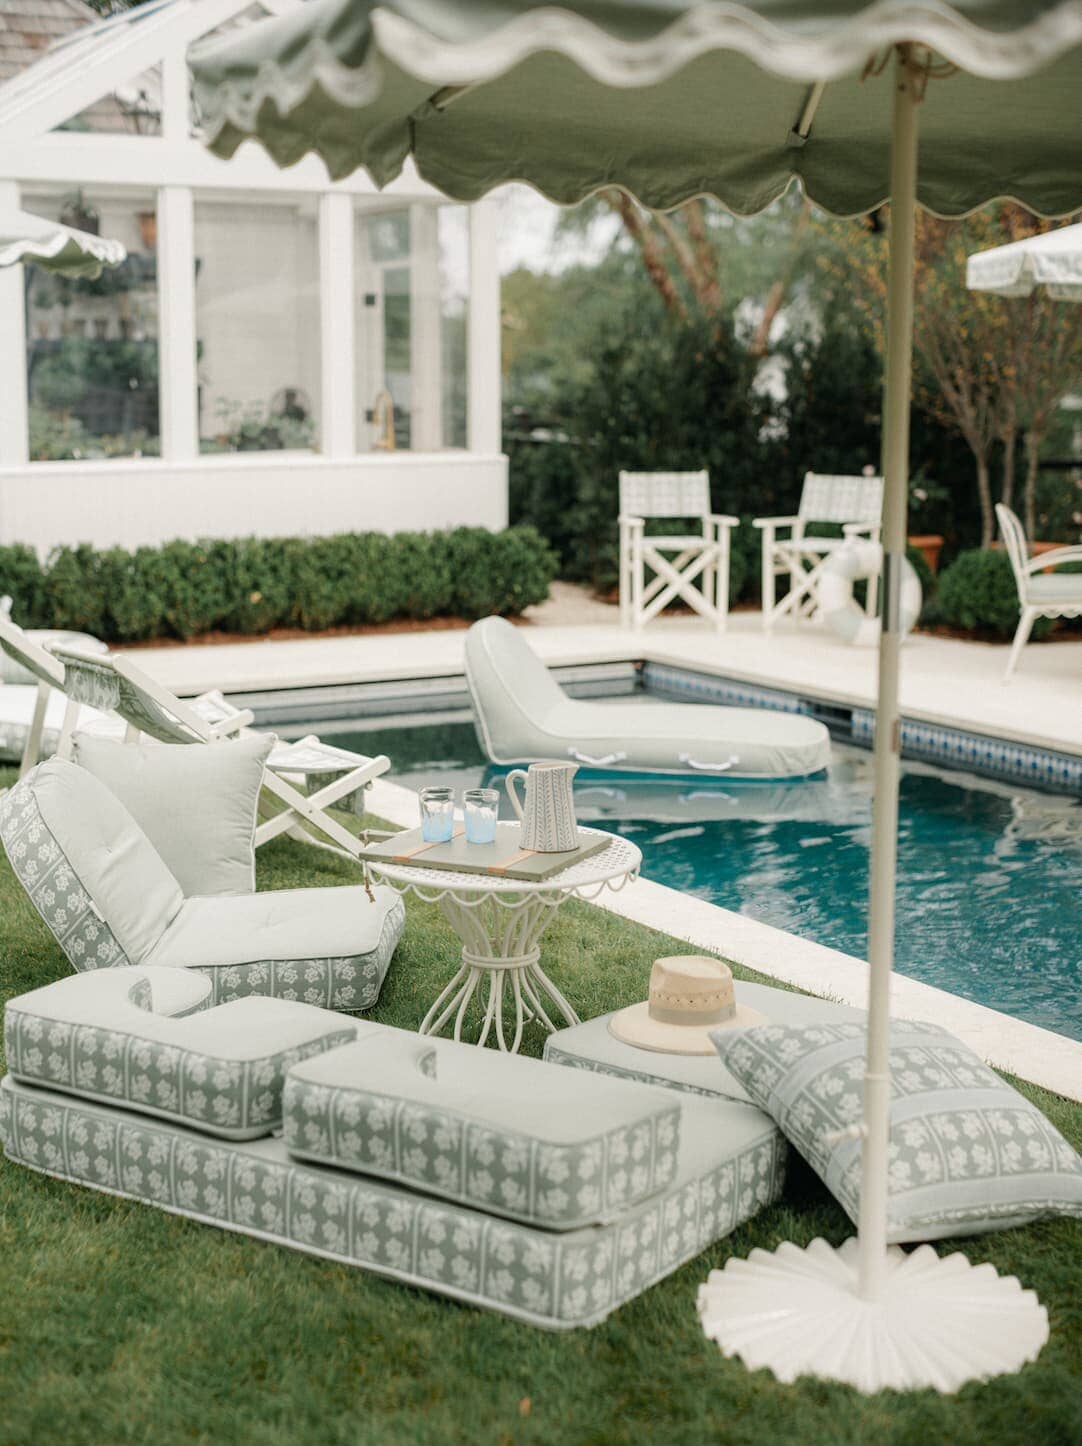 Backyard pool area with outdoor pillow stack, umbrellas, and reclining lounger